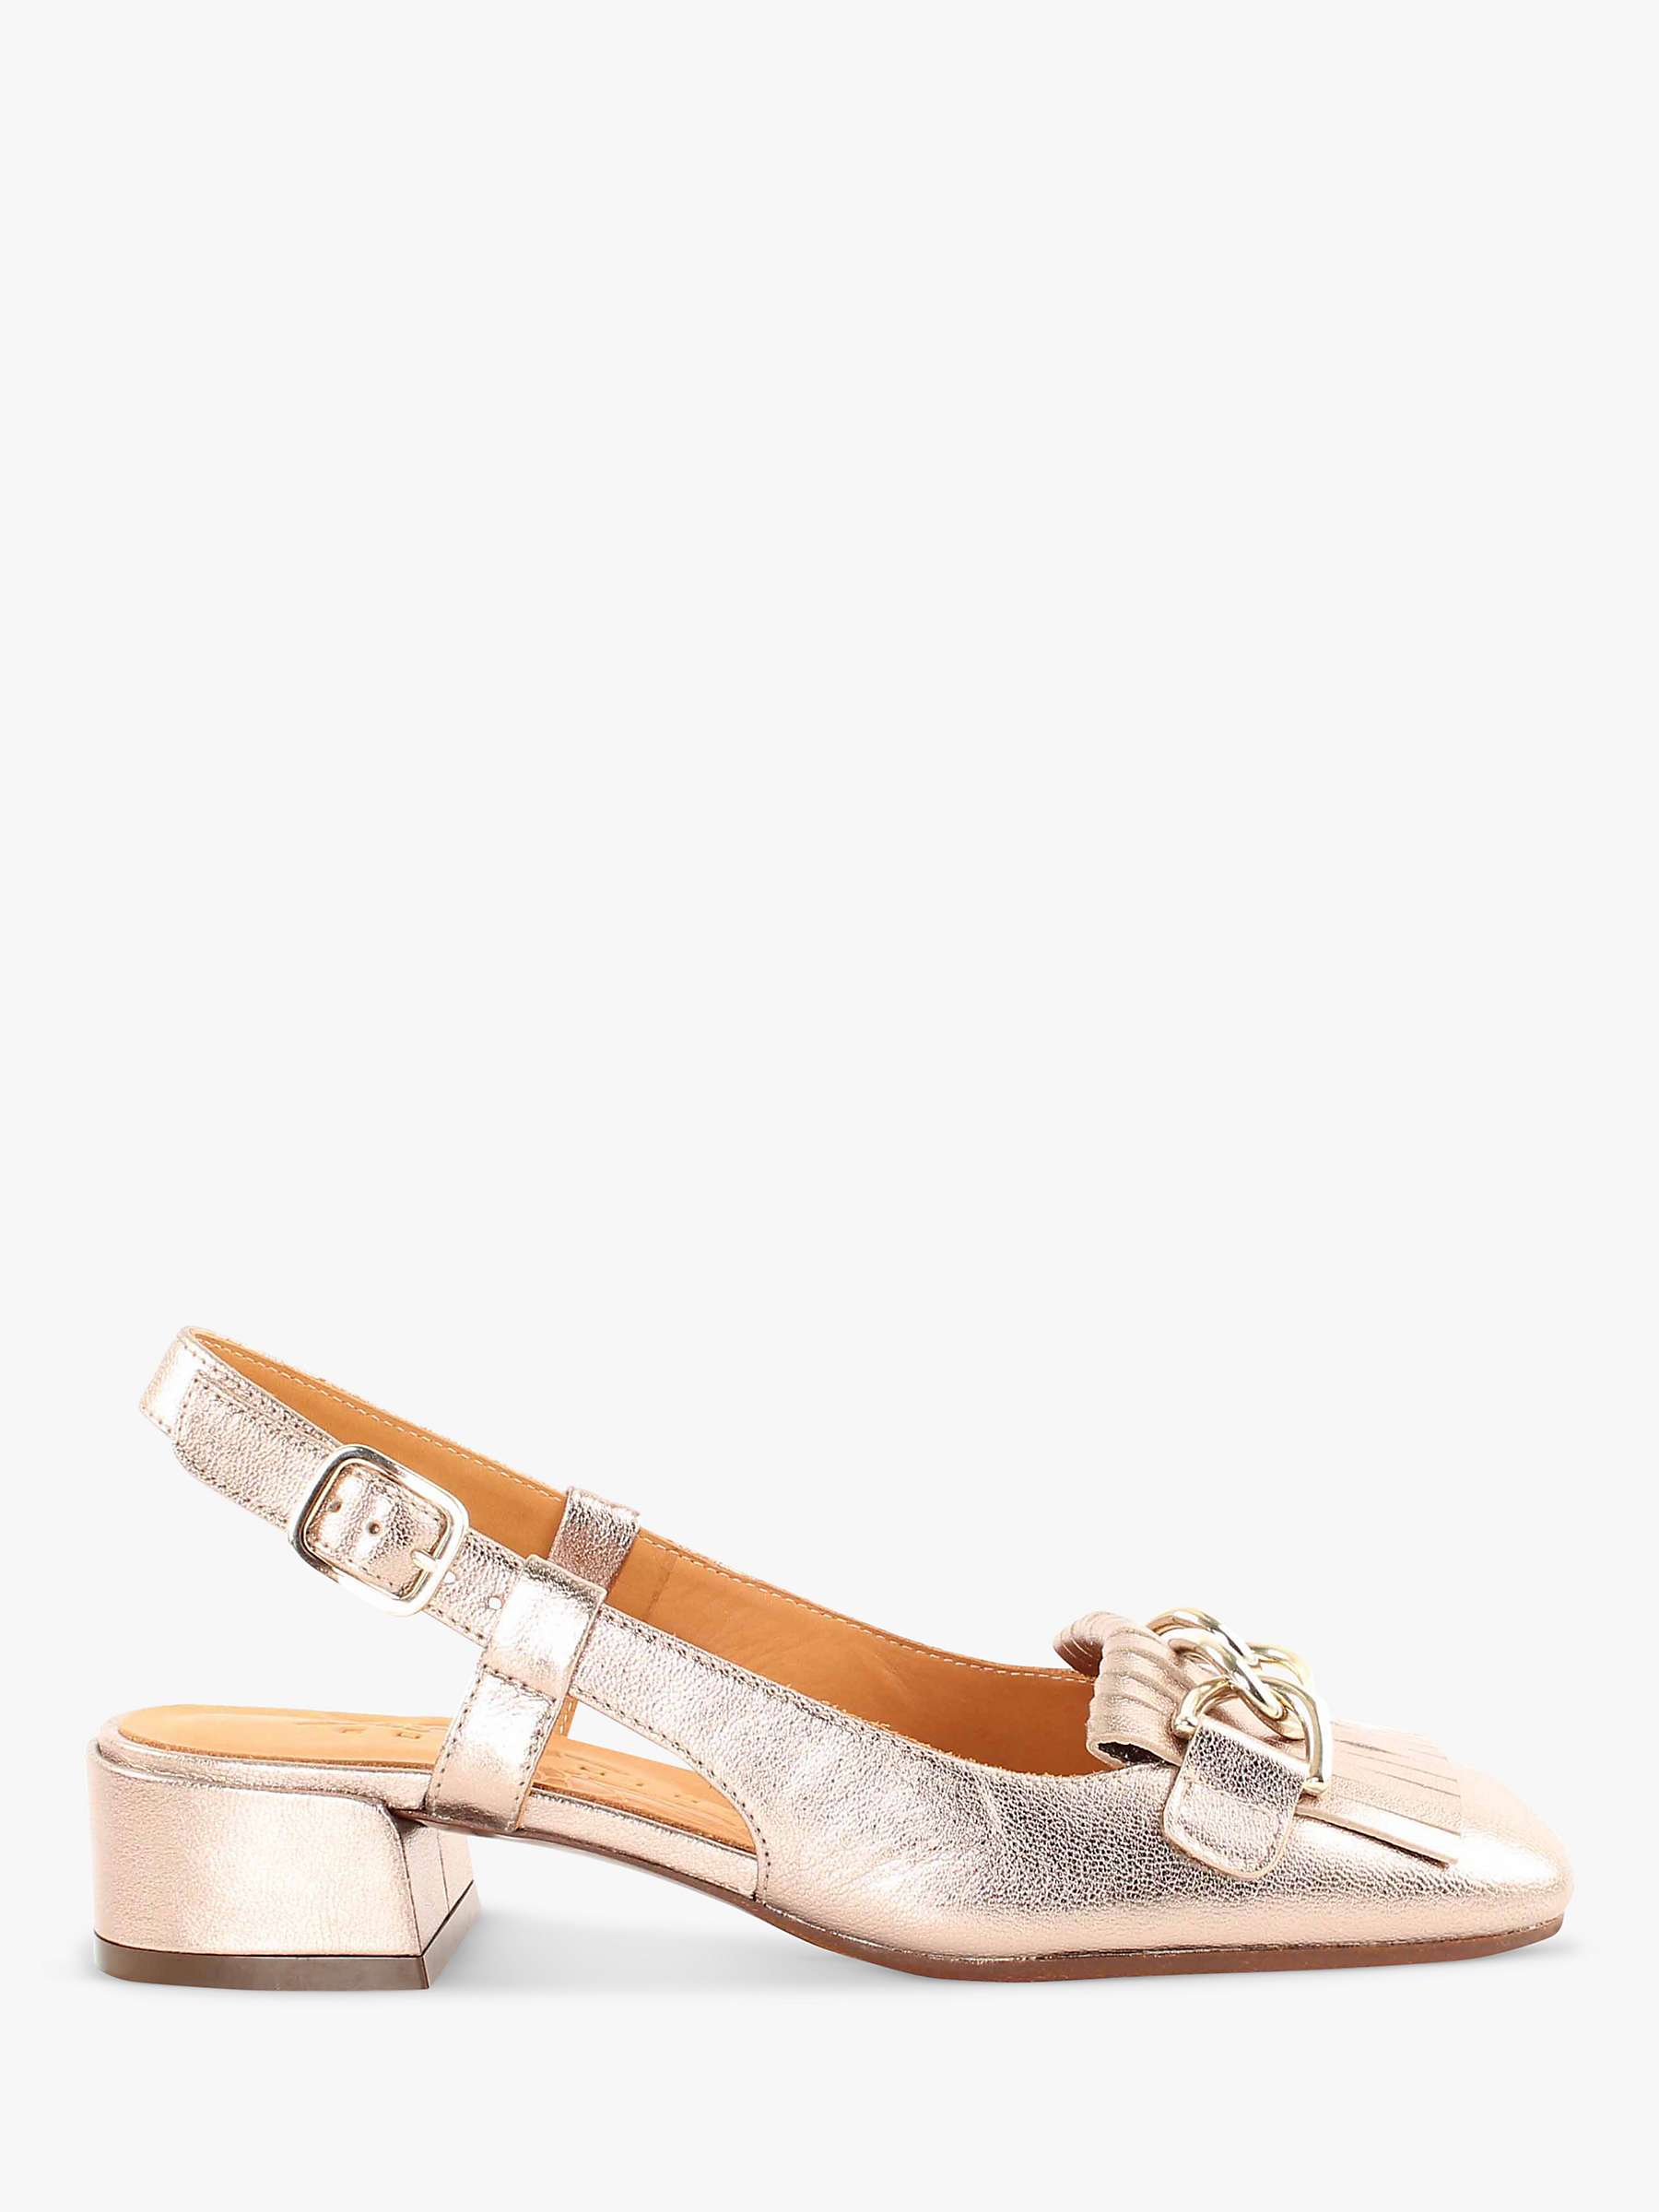 Buy Chie Mihara Ilna Leather Sling Back Court Shoes, Dali Iron Online at johnlewis.com